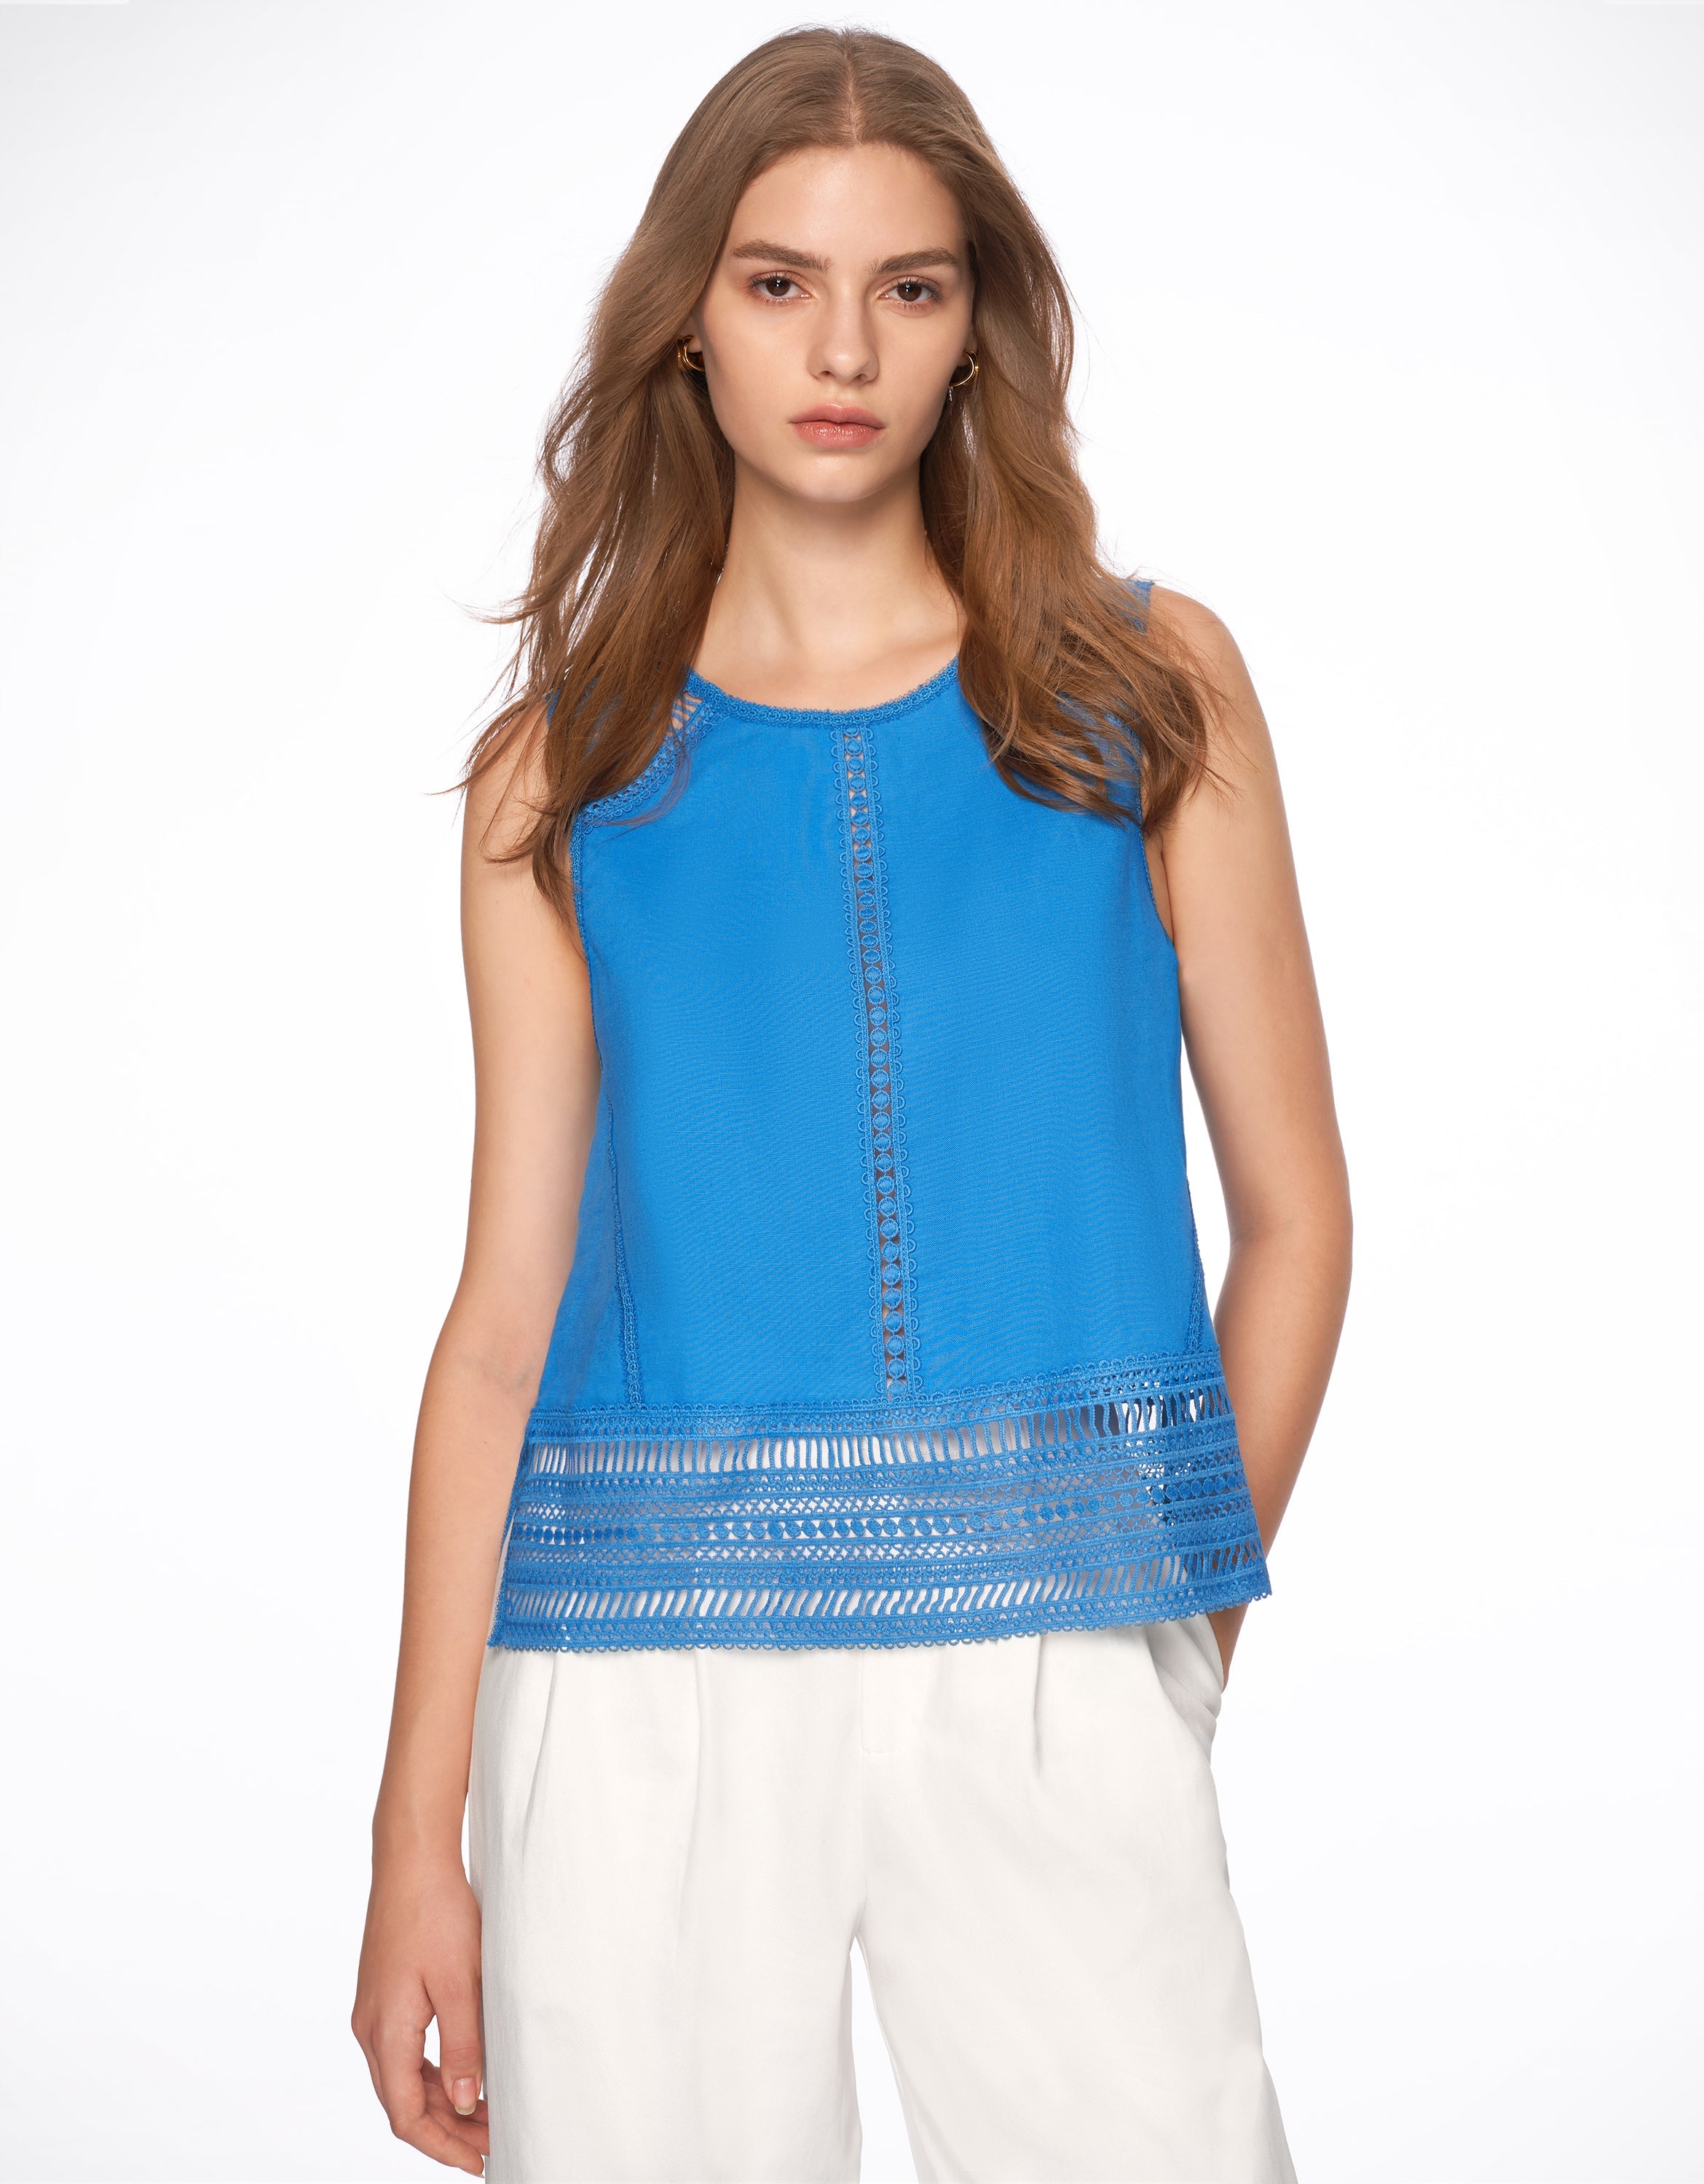 Lace Detail Sleeveless Top